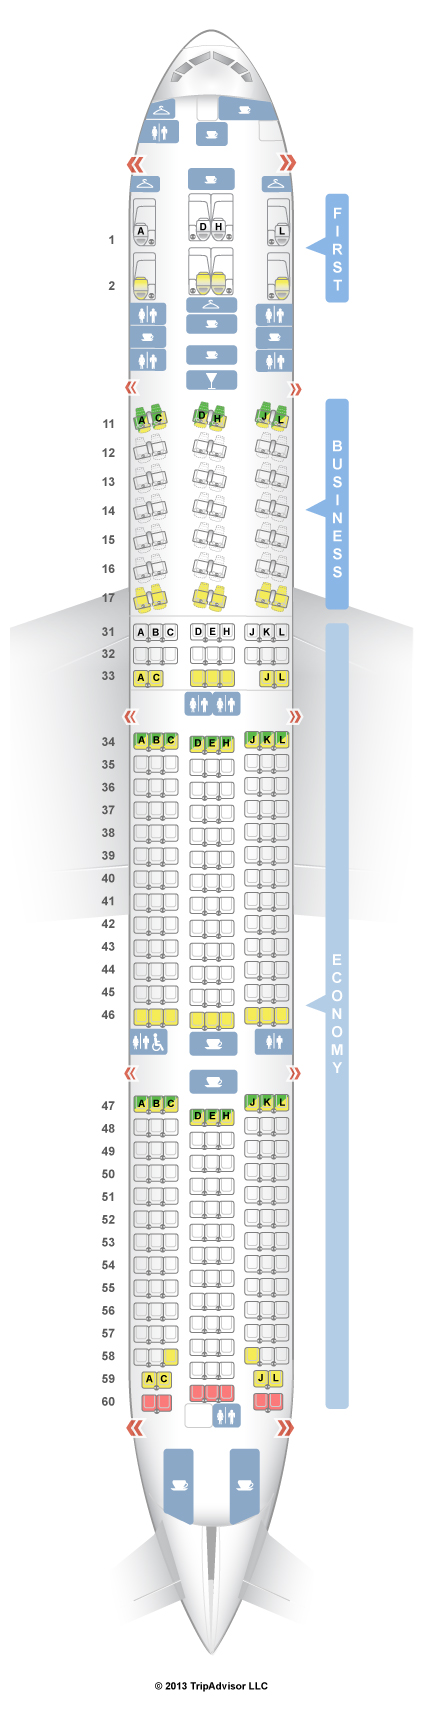 Air france boeing 777 200 seating chart